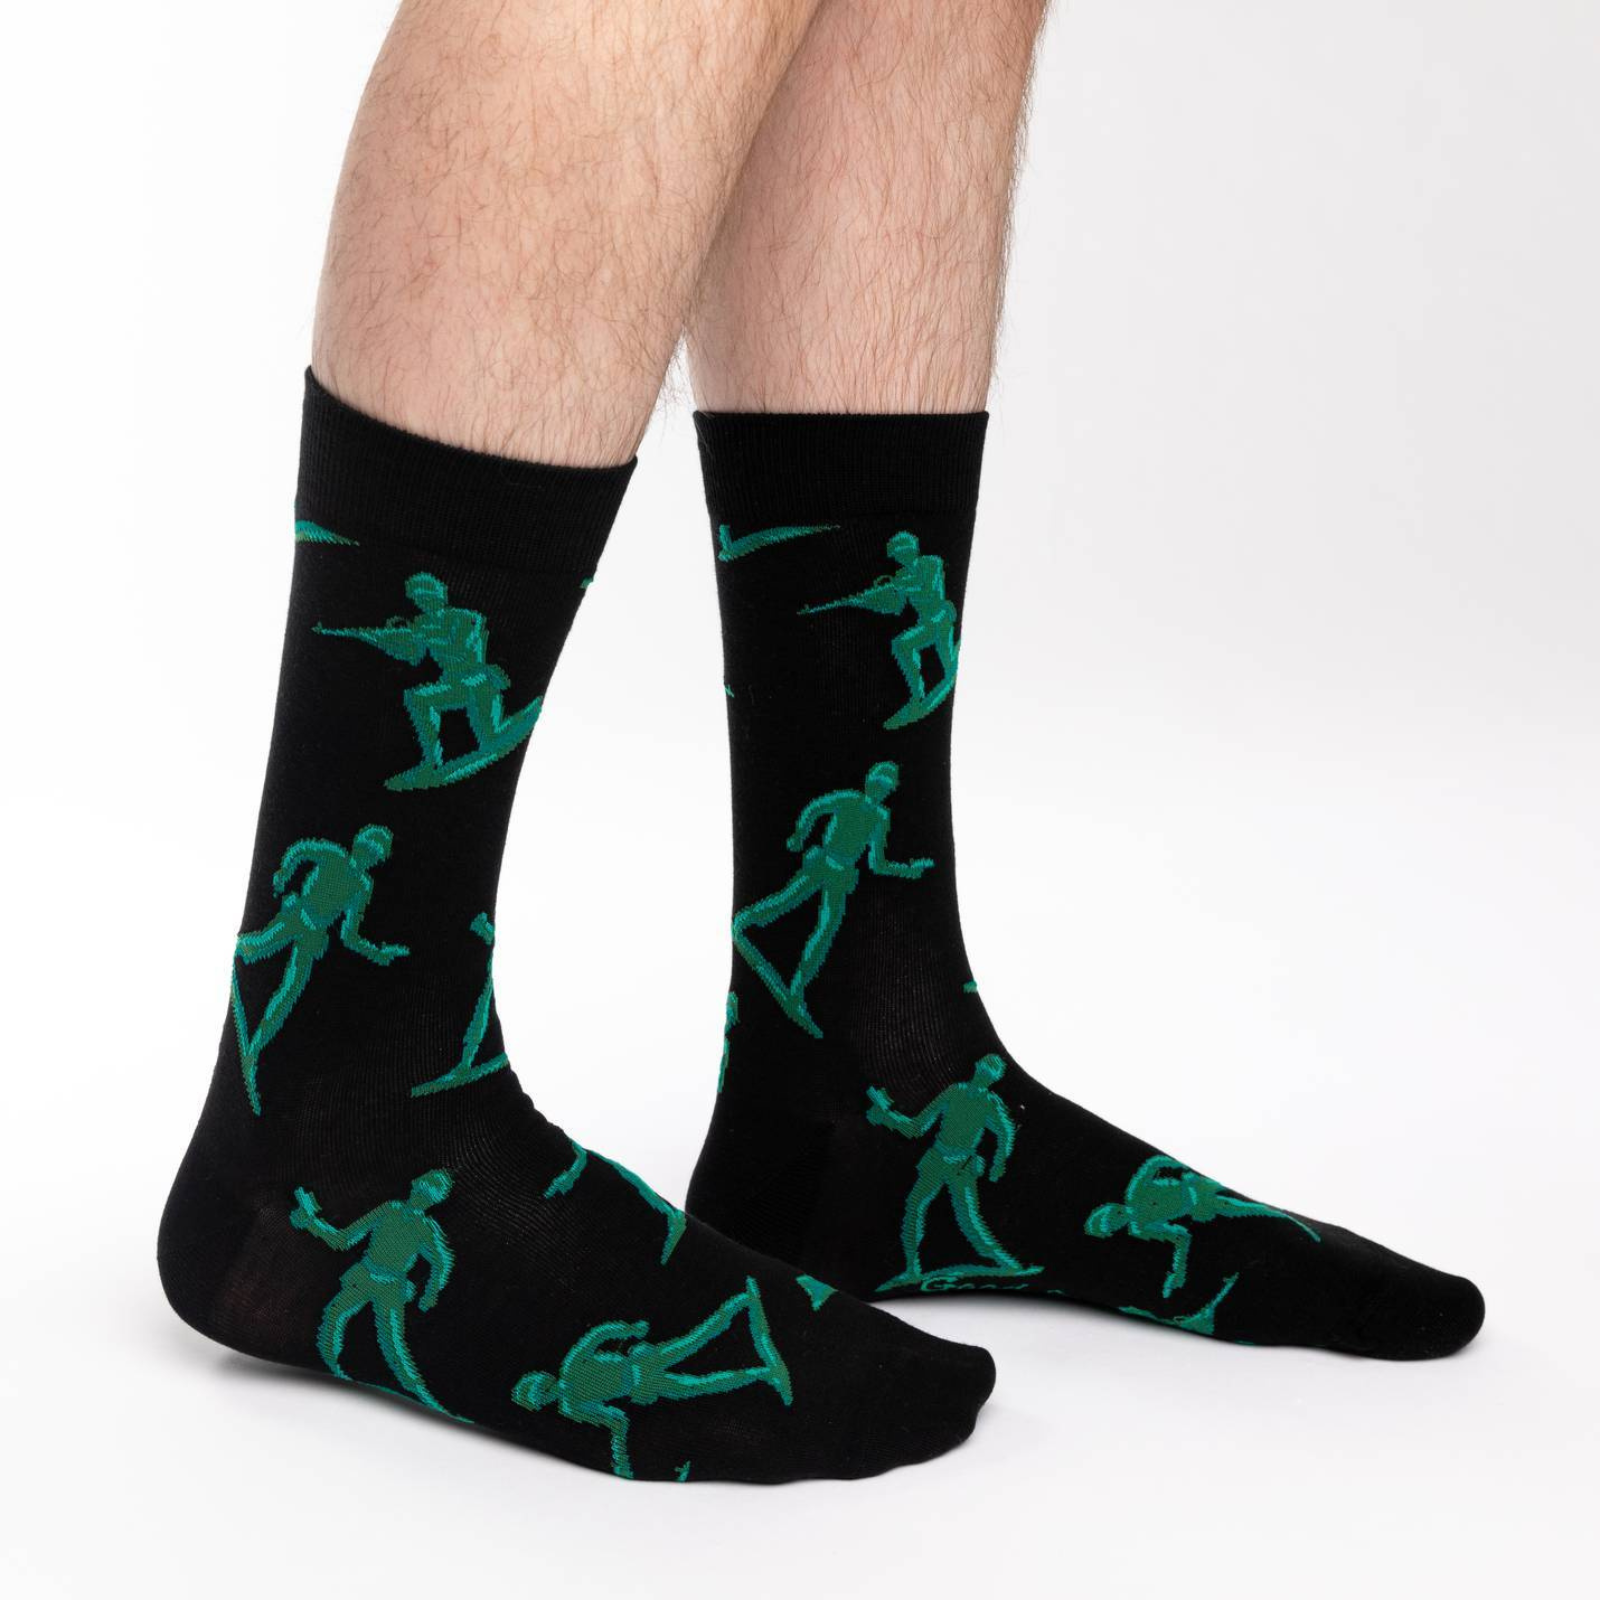 Good Luck Sock men's black crew sock with green Toy Soldiers all over on male model